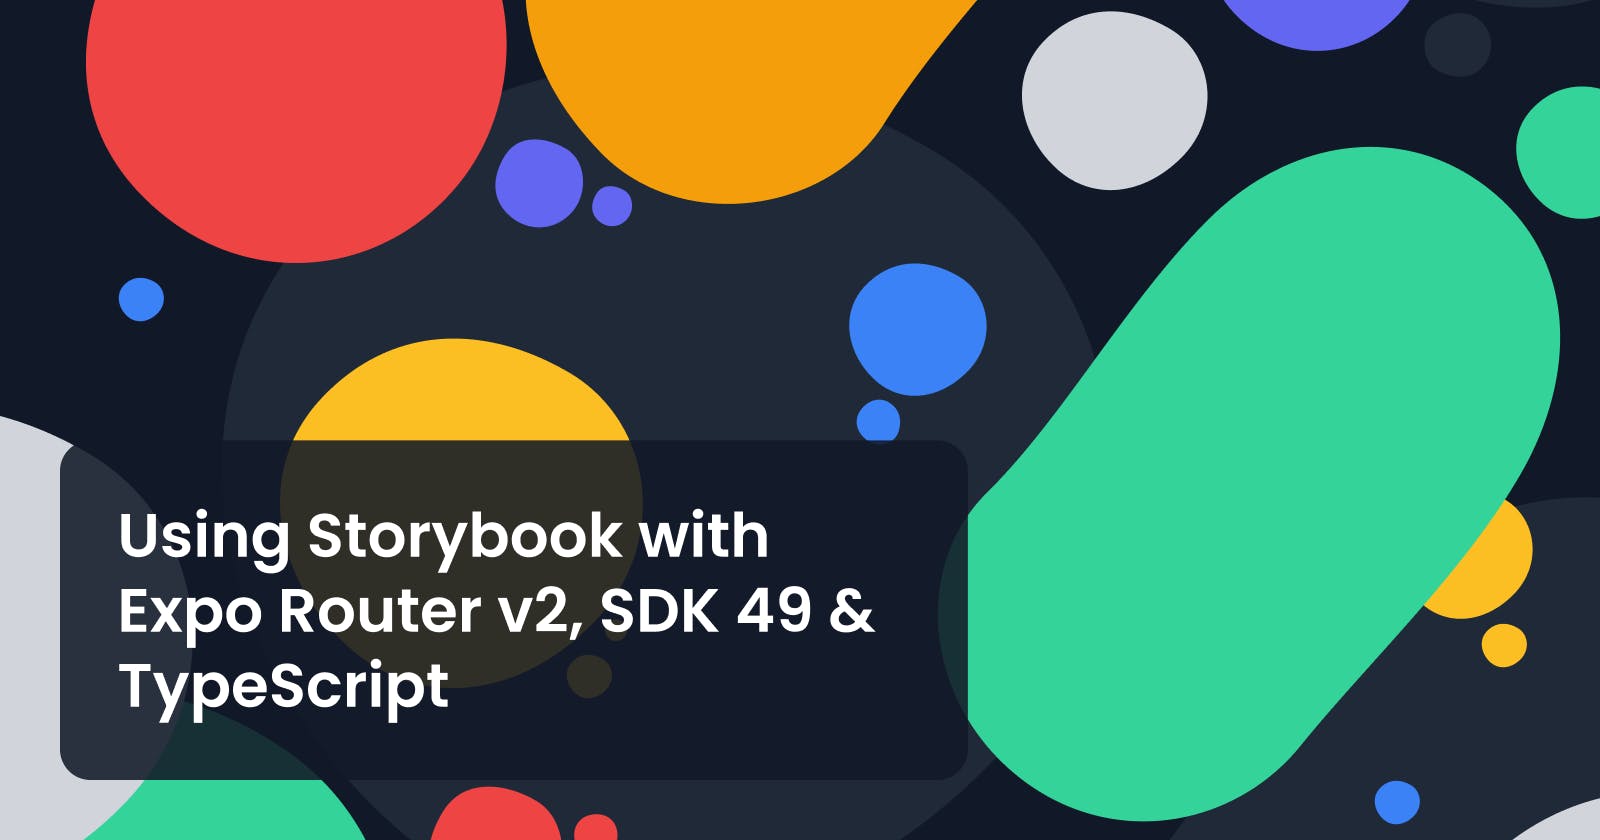 Using Storybook with Expo Router v2, SDK 49 & TypeScript